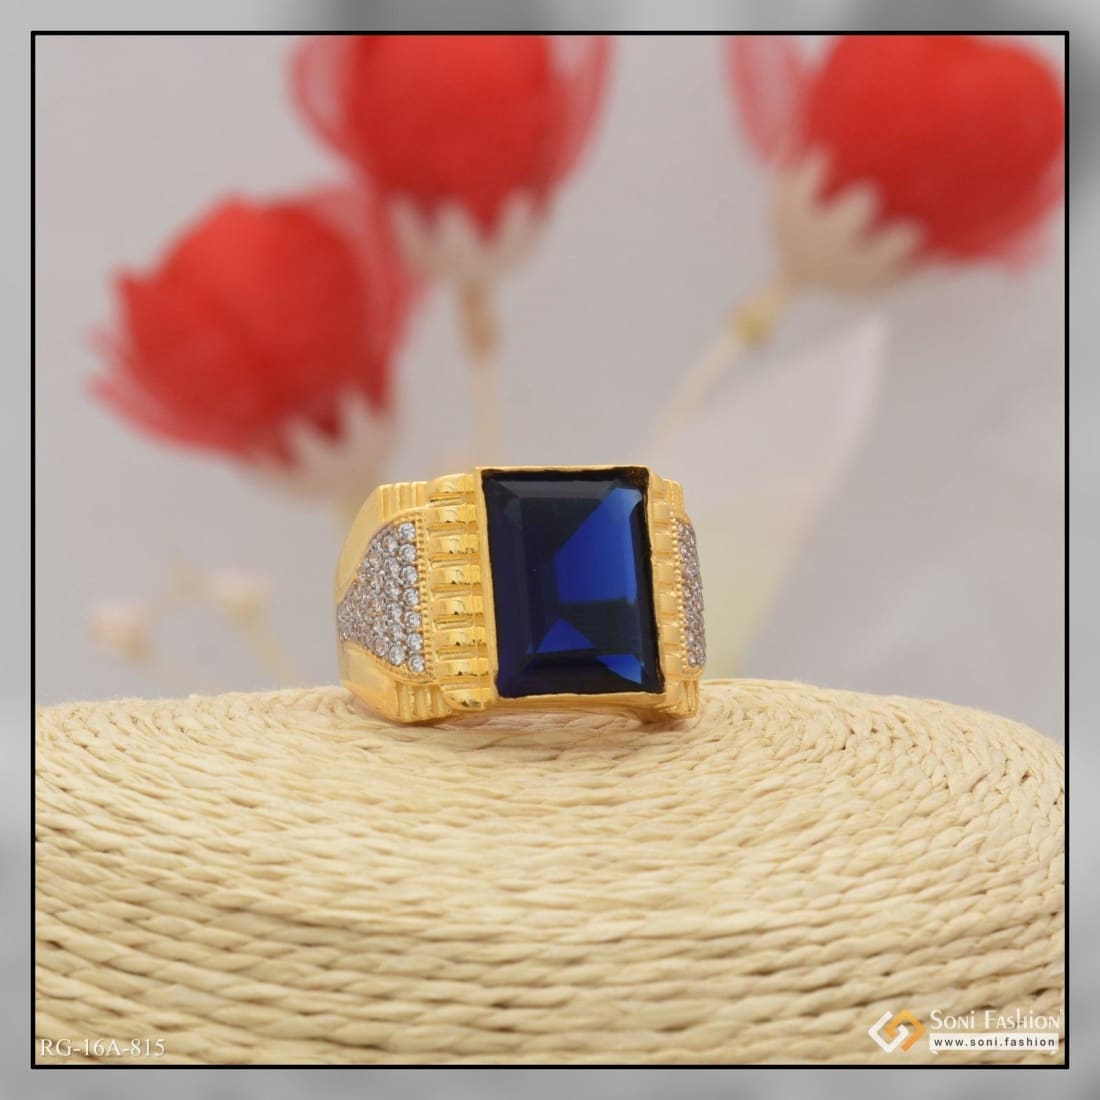 Blue Stone Eiffel Tower Stylish Design Best Quality Gold Plated Ring -  Style A826 at Rs 700.00 | Rajkot| ID: 2849507608462